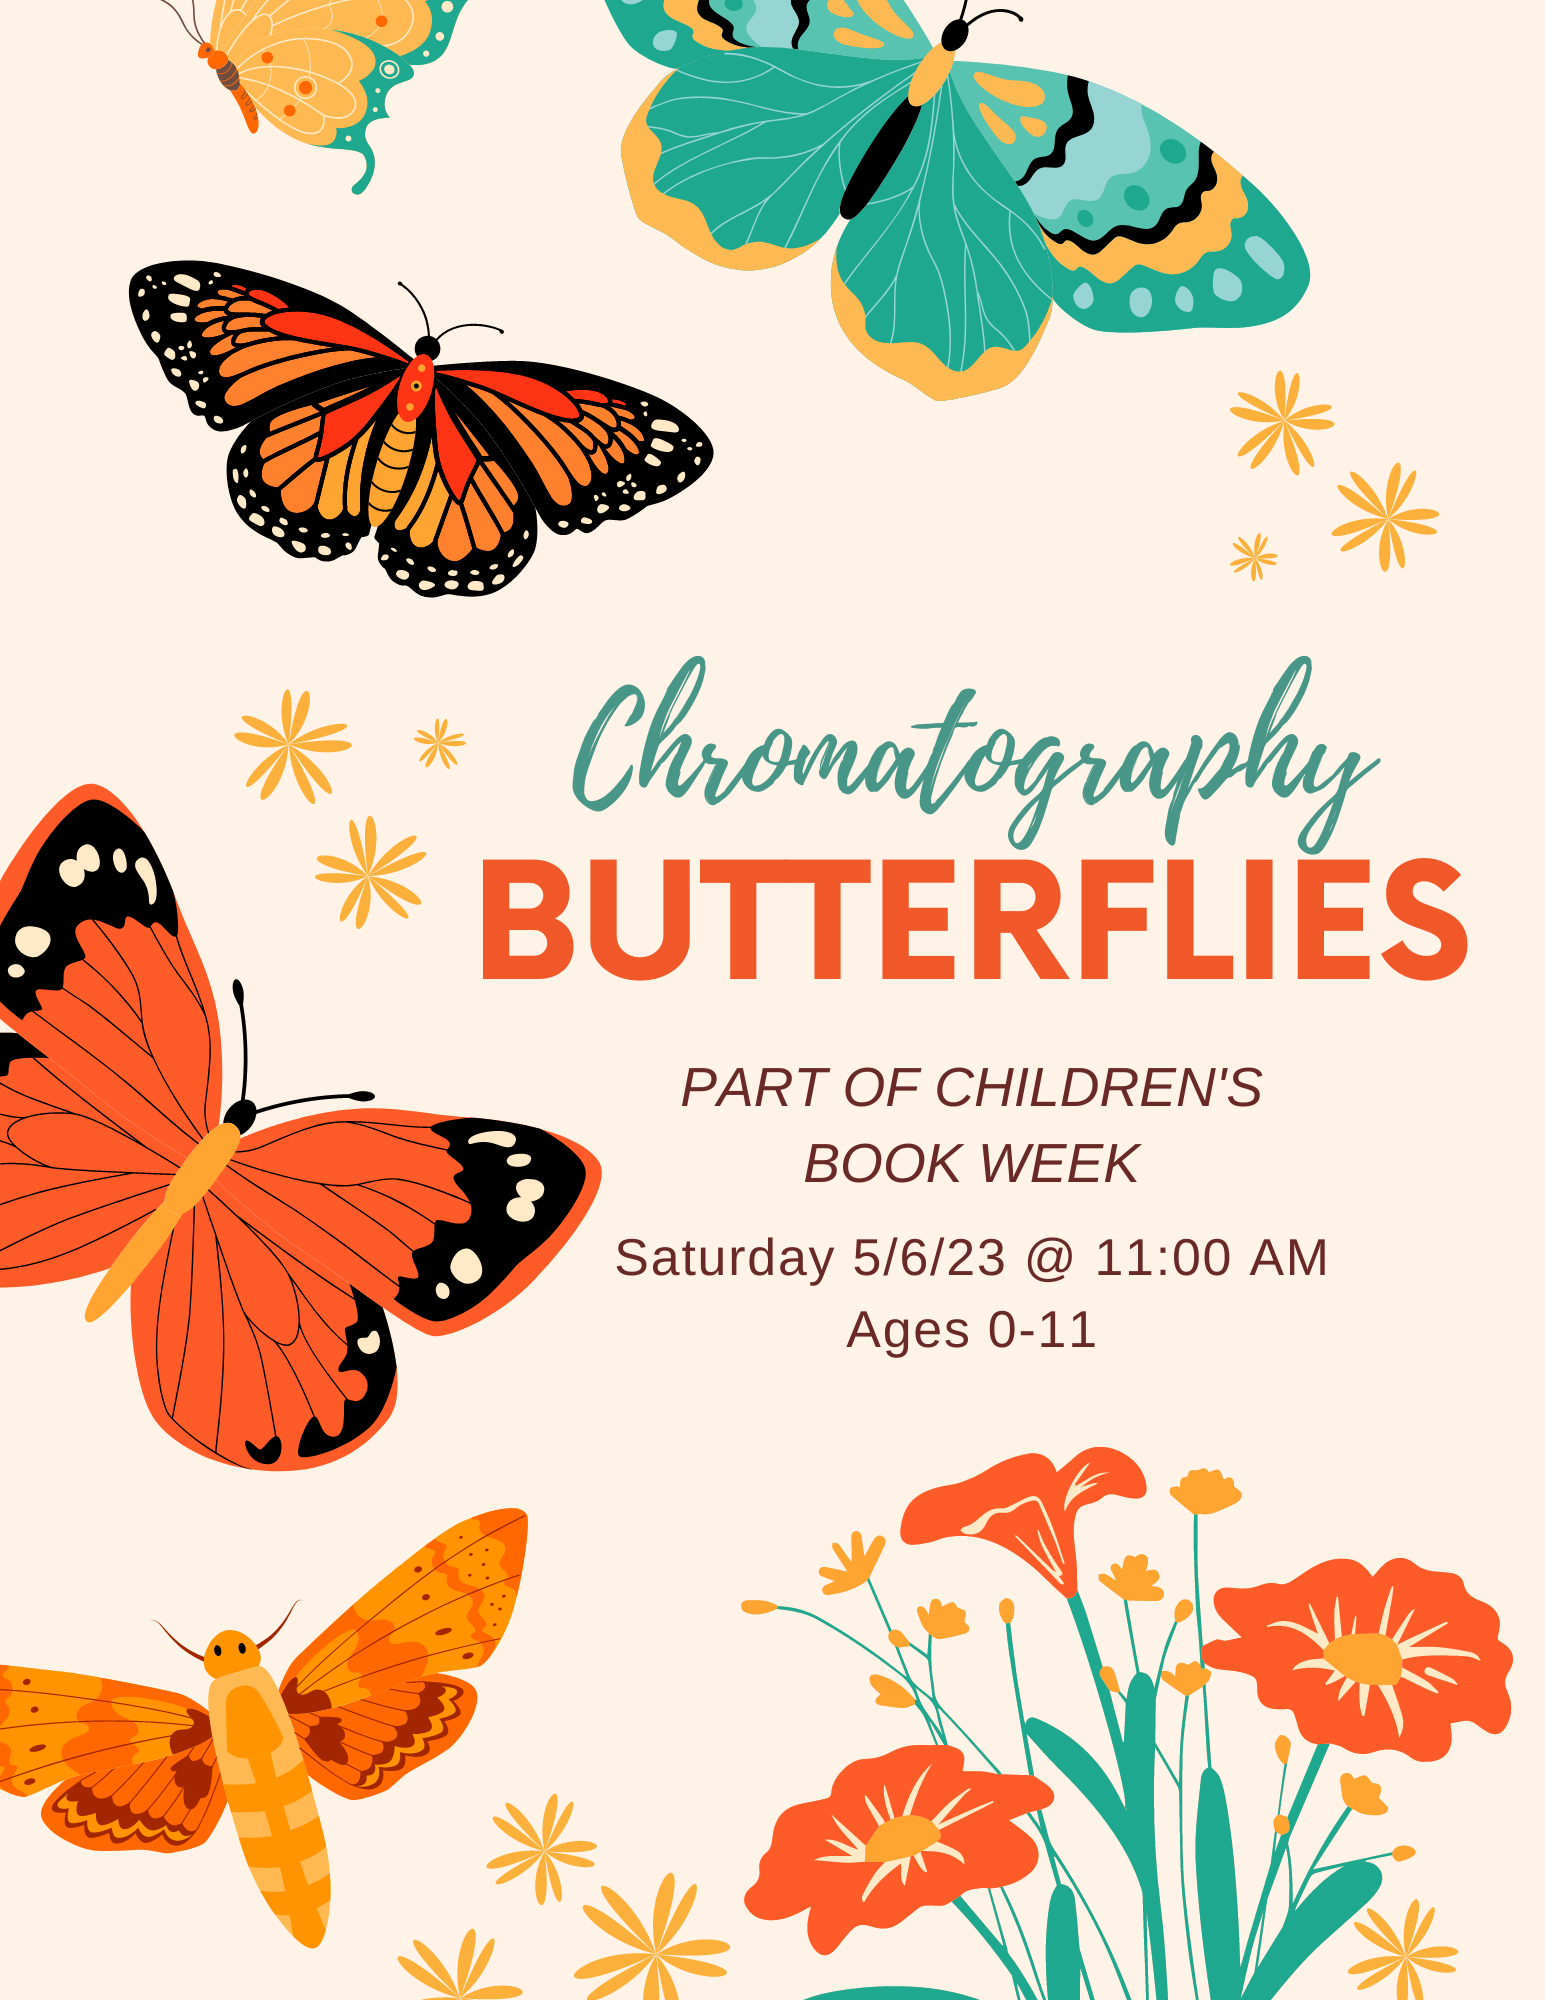 Flyer with images of butterflies. text reads "chromatography butterflies. part of children's book week. saturday 5/6/23 at 11:00 am. ages 0-11."